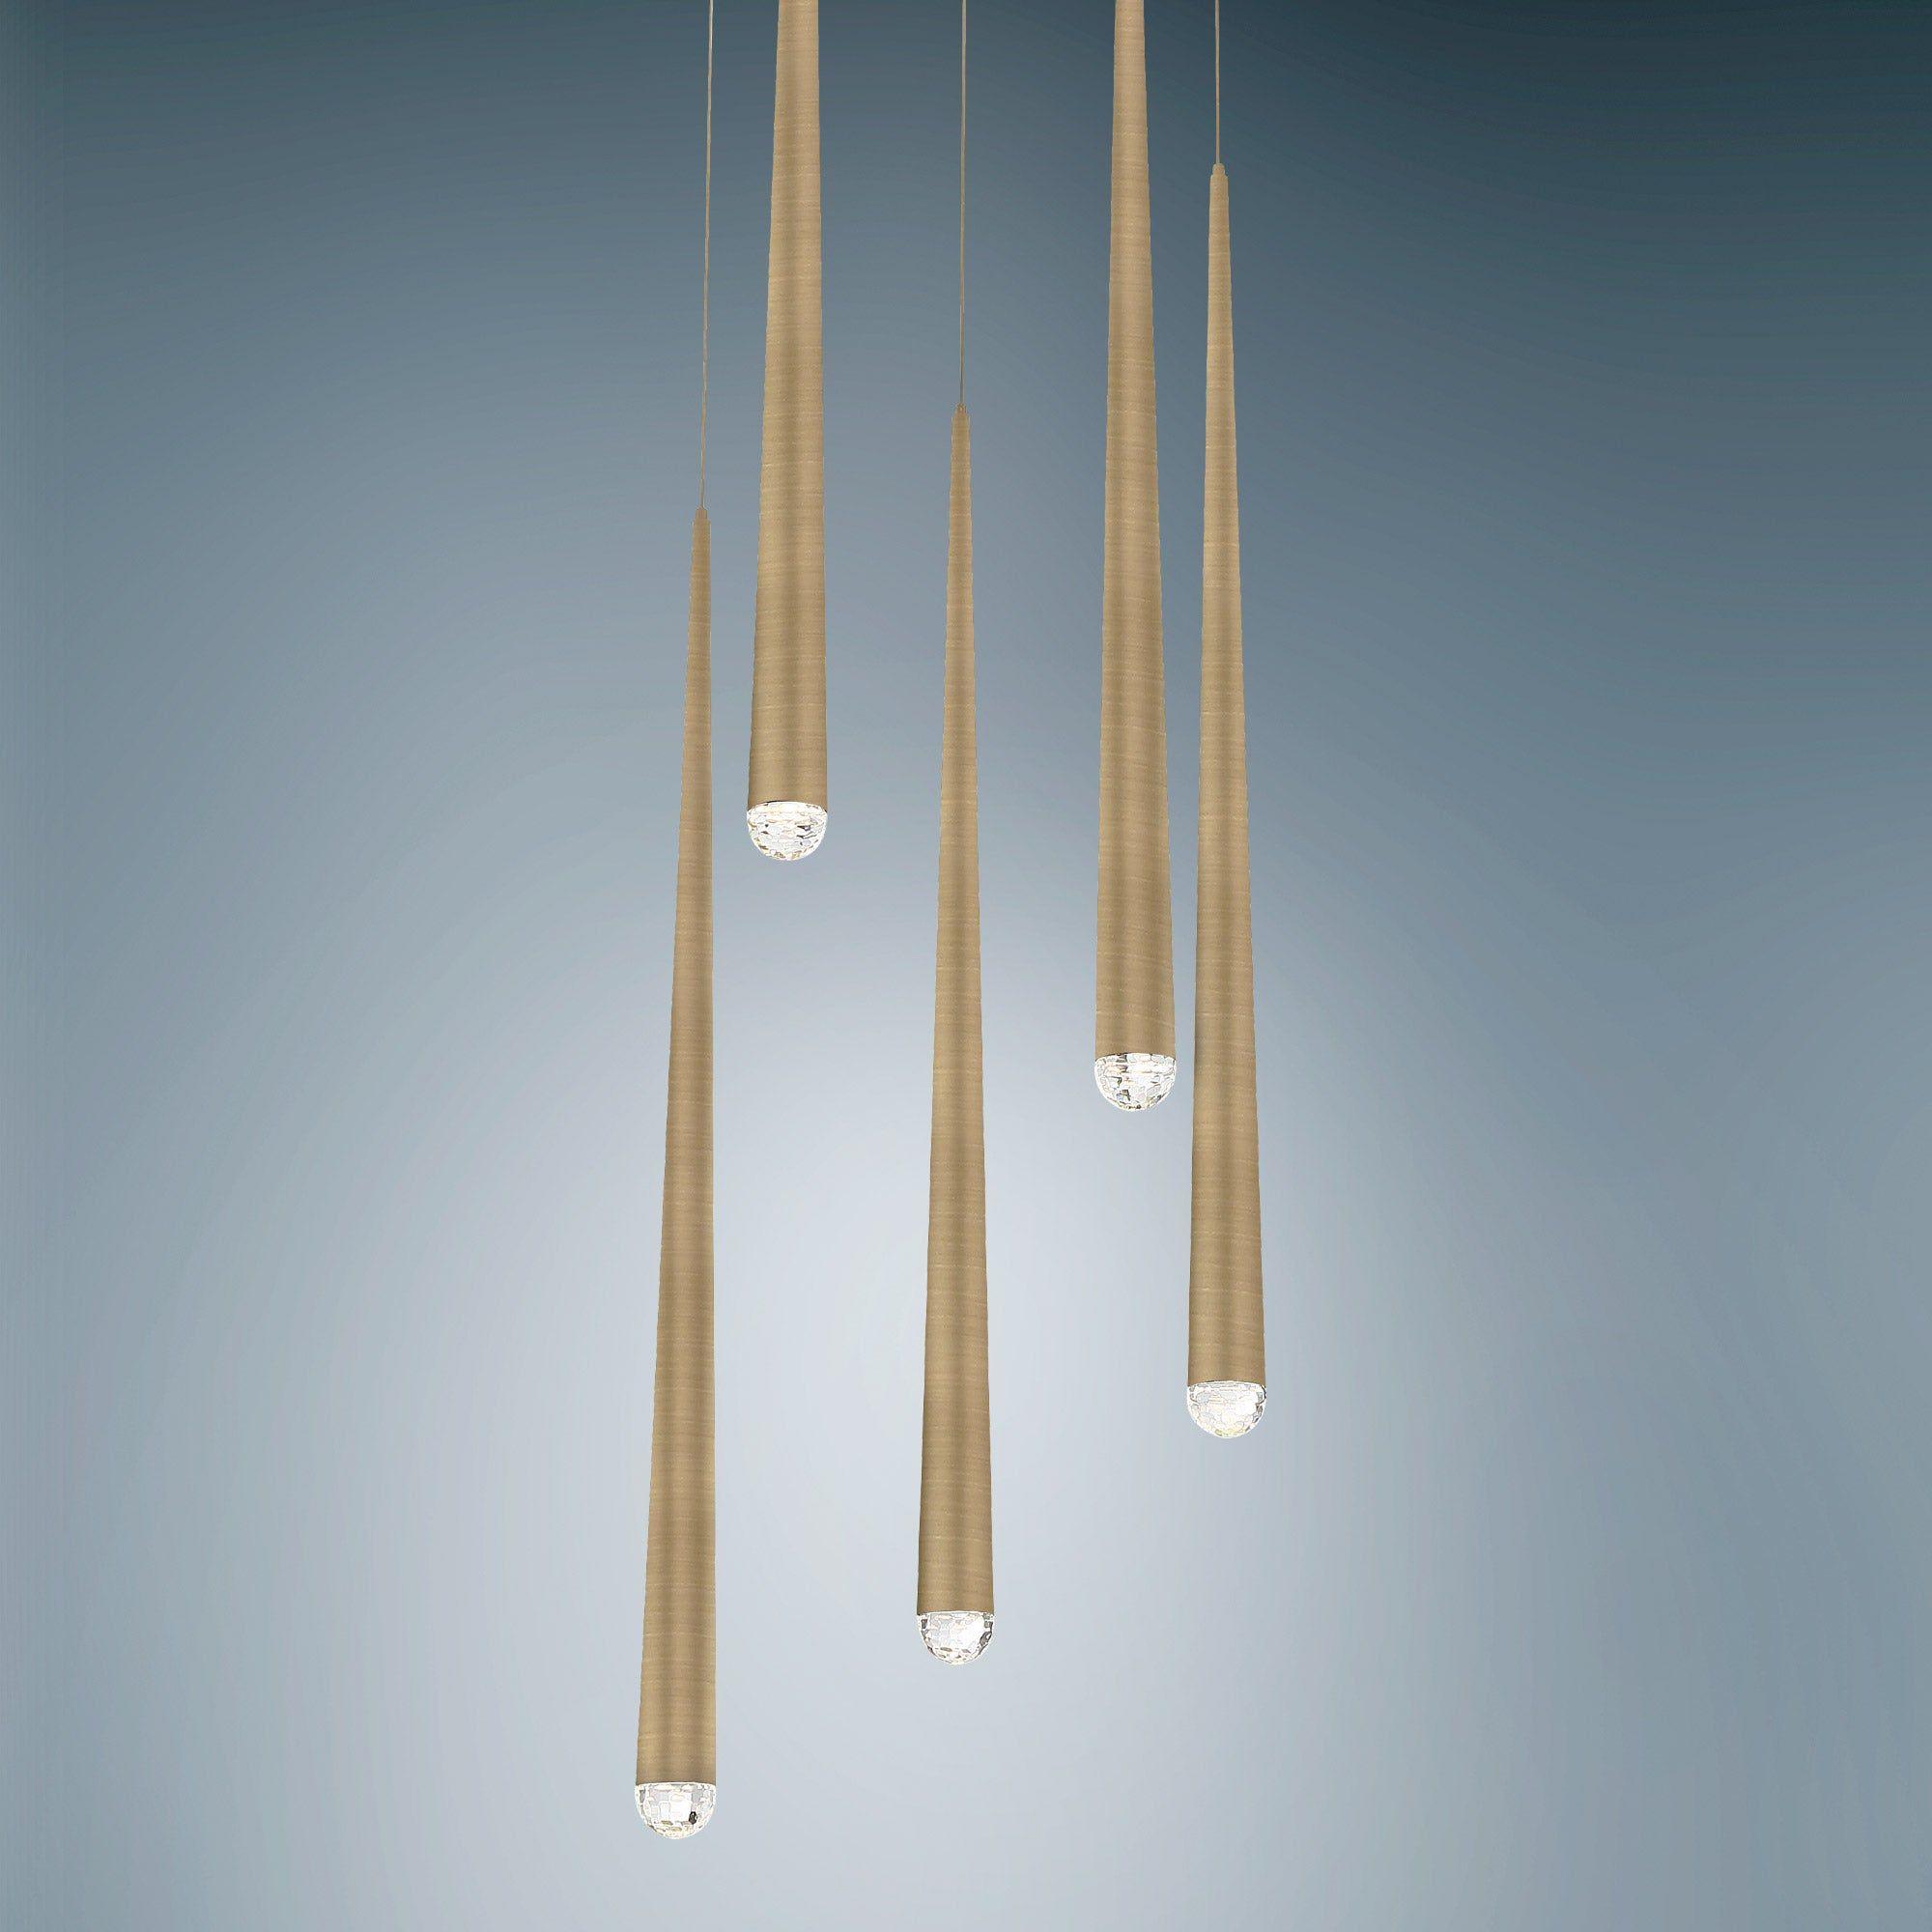 Modern Forms - Cascade LED 5 Light Crystal Round Chandelier - Lights Canada